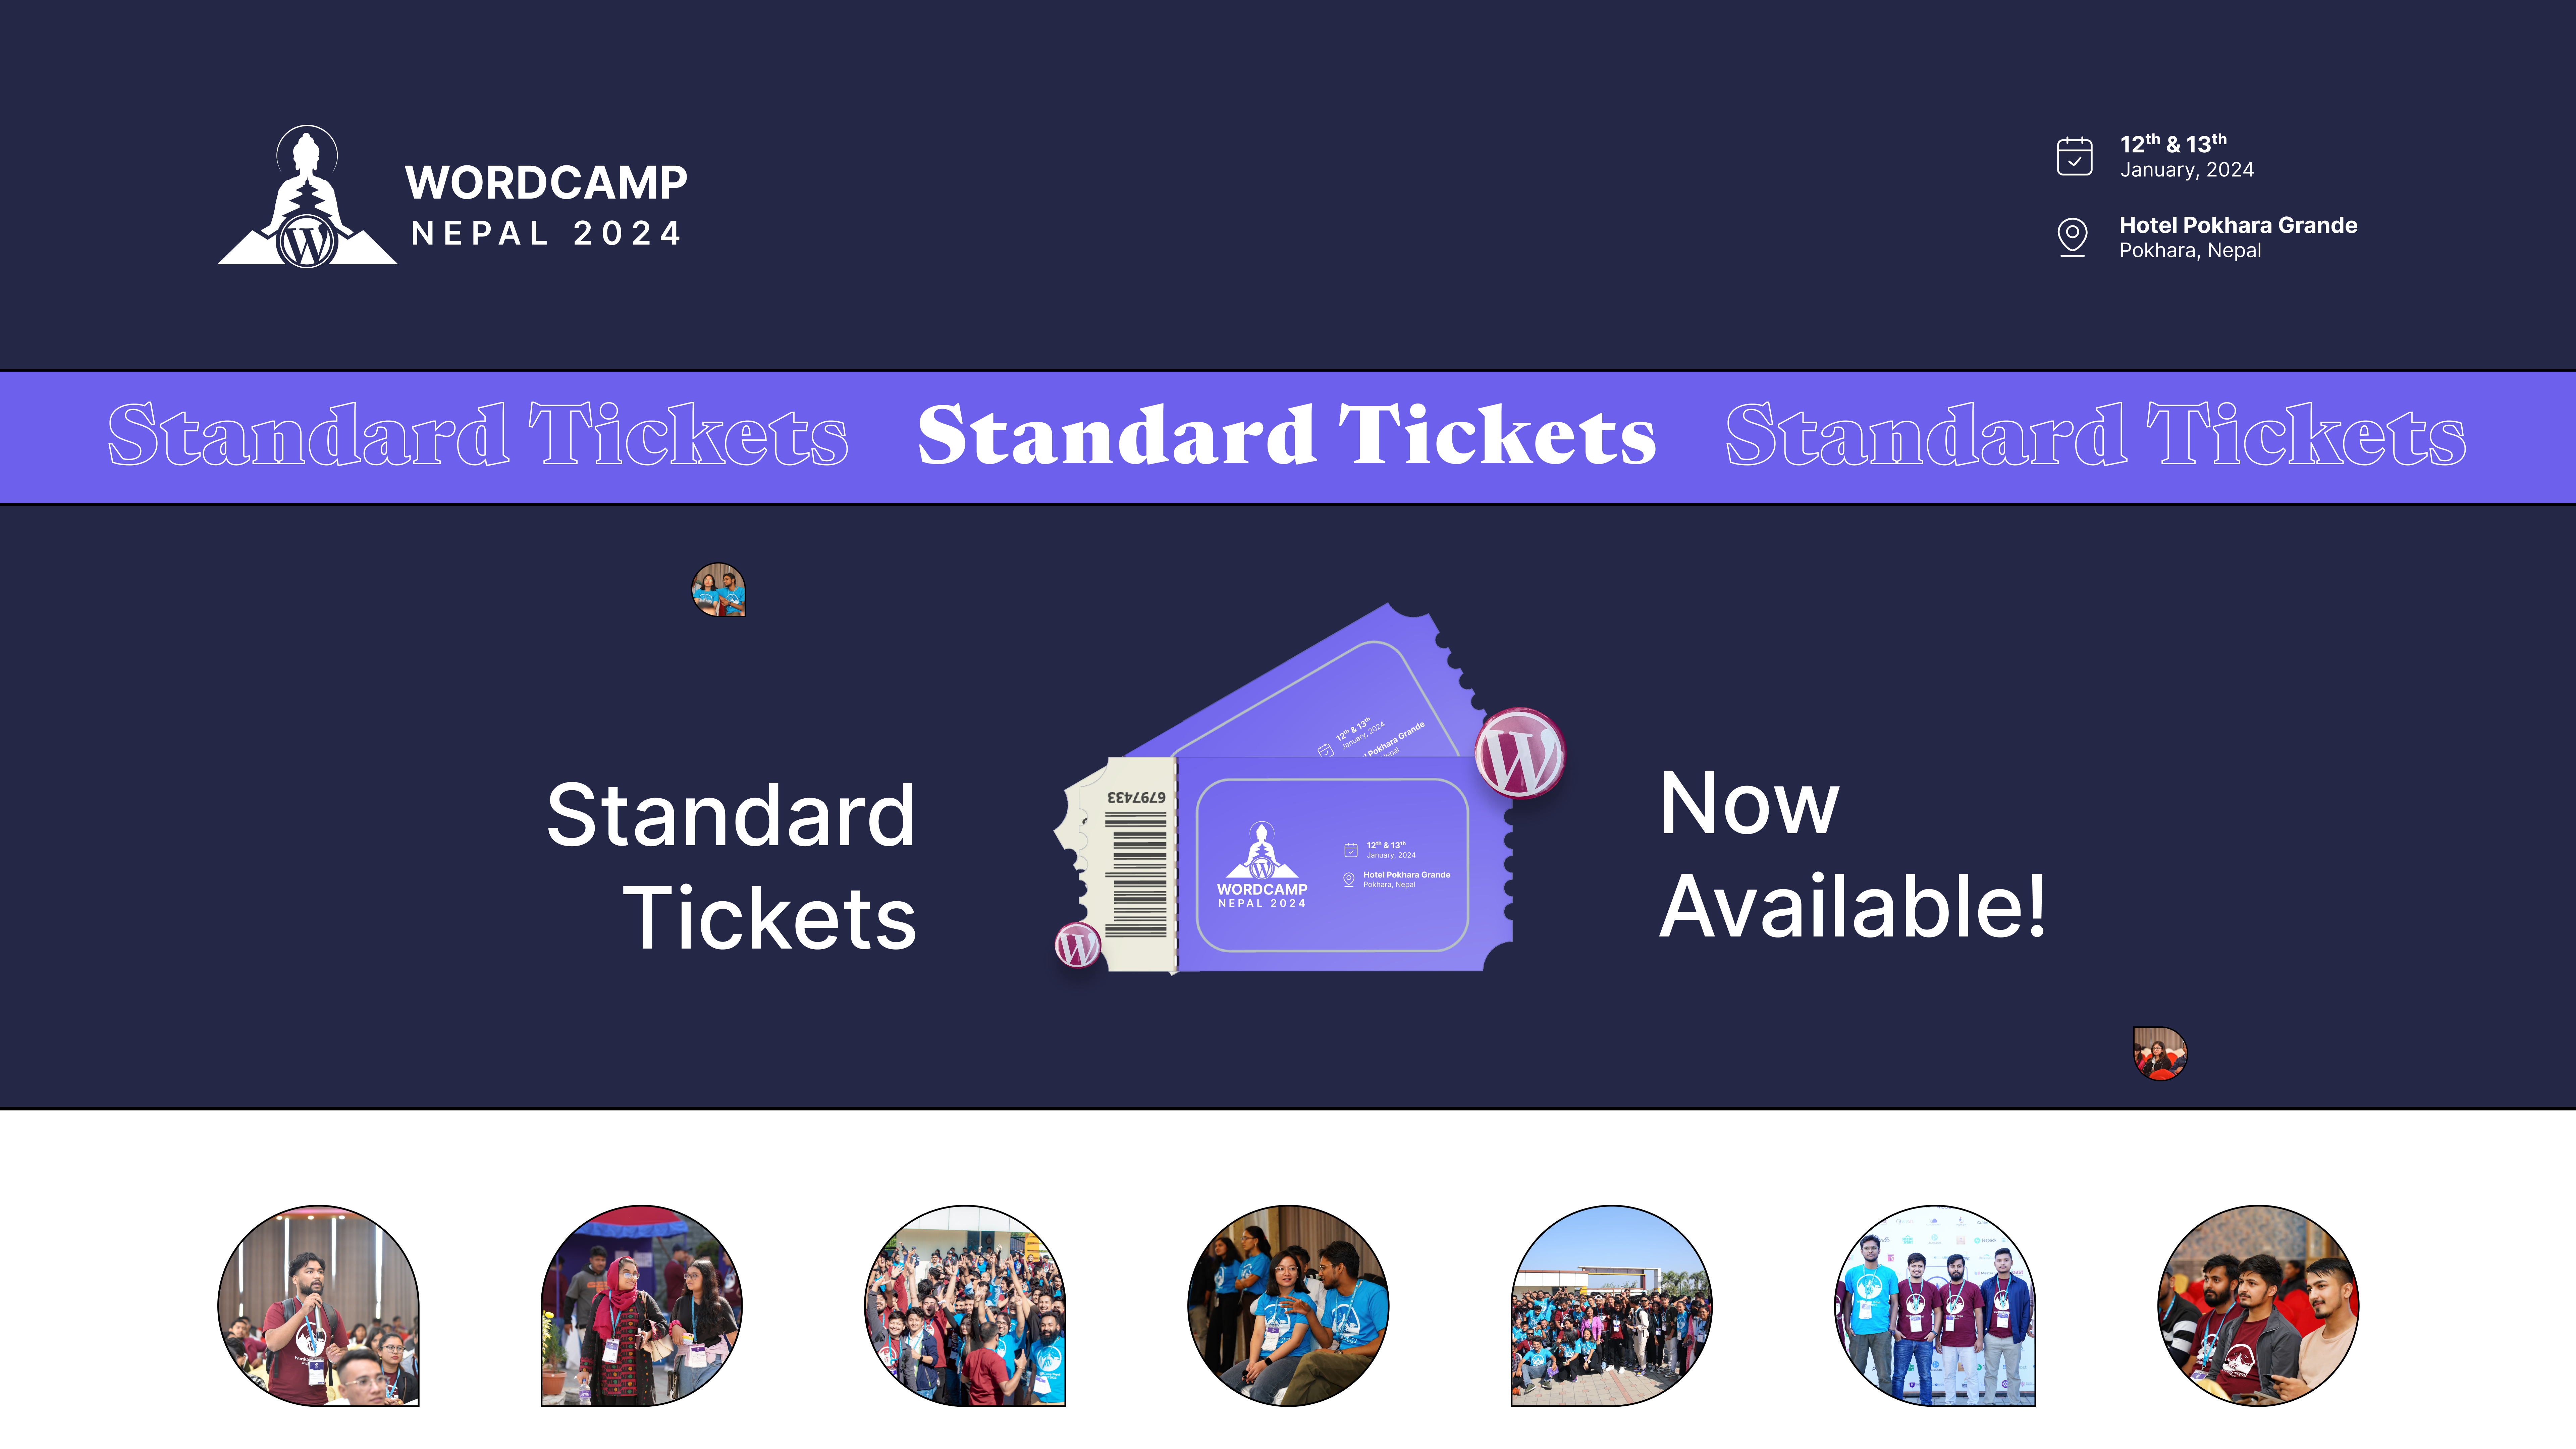 Standard Tickets – Now Available!